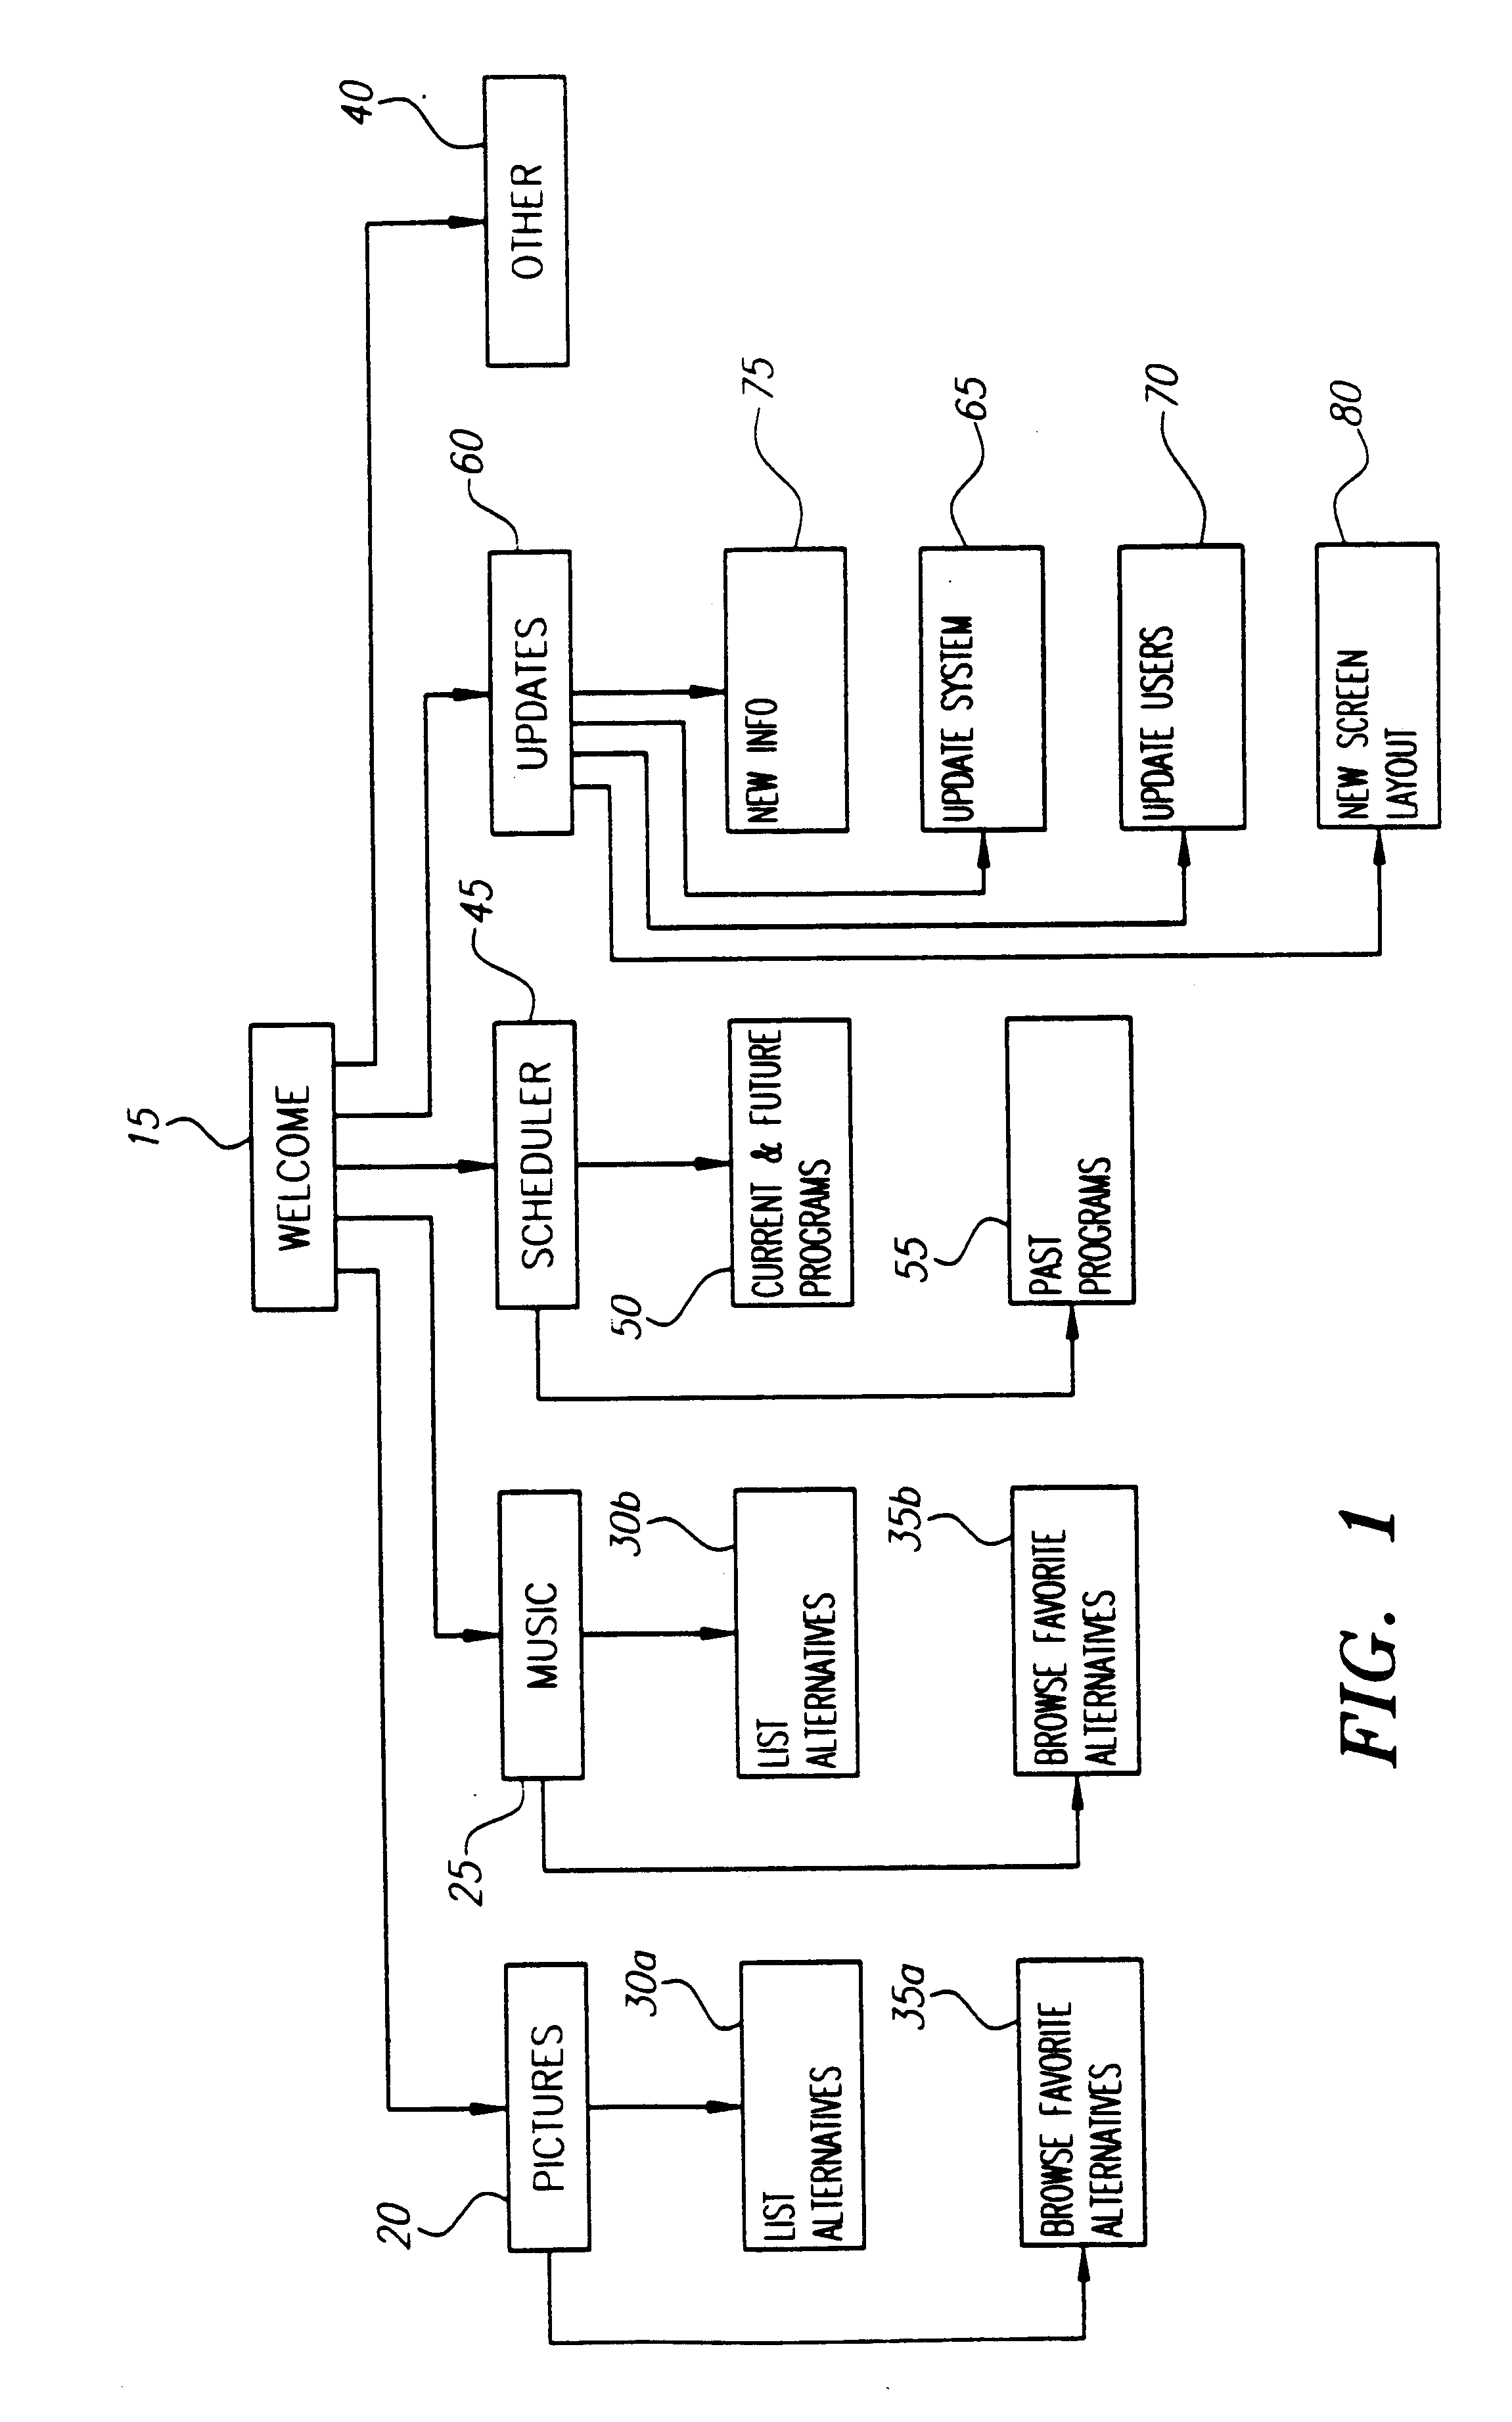 Portable internet-enabled controller and information browser for consumer devices